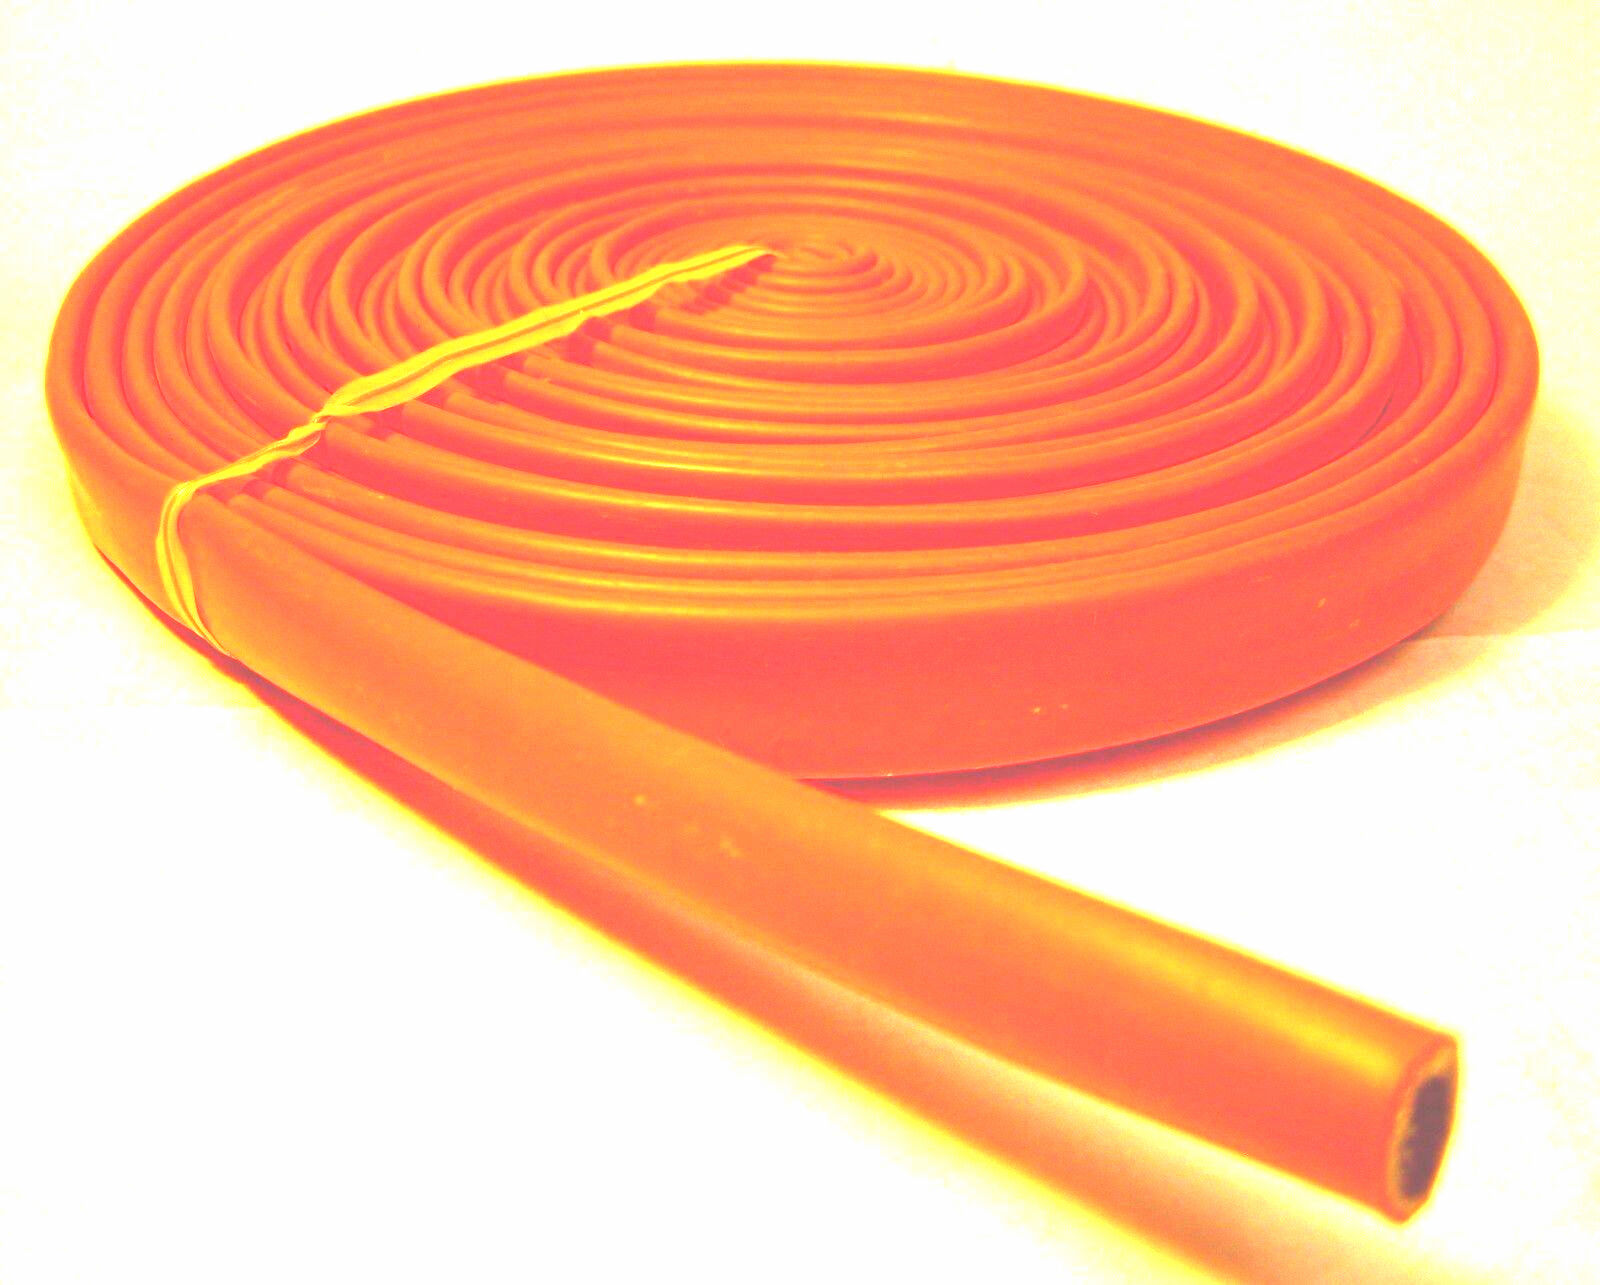 Vulcan Orange Heat Protector Silicone Spark Plug Wire Sleeve 25' Made in the USA